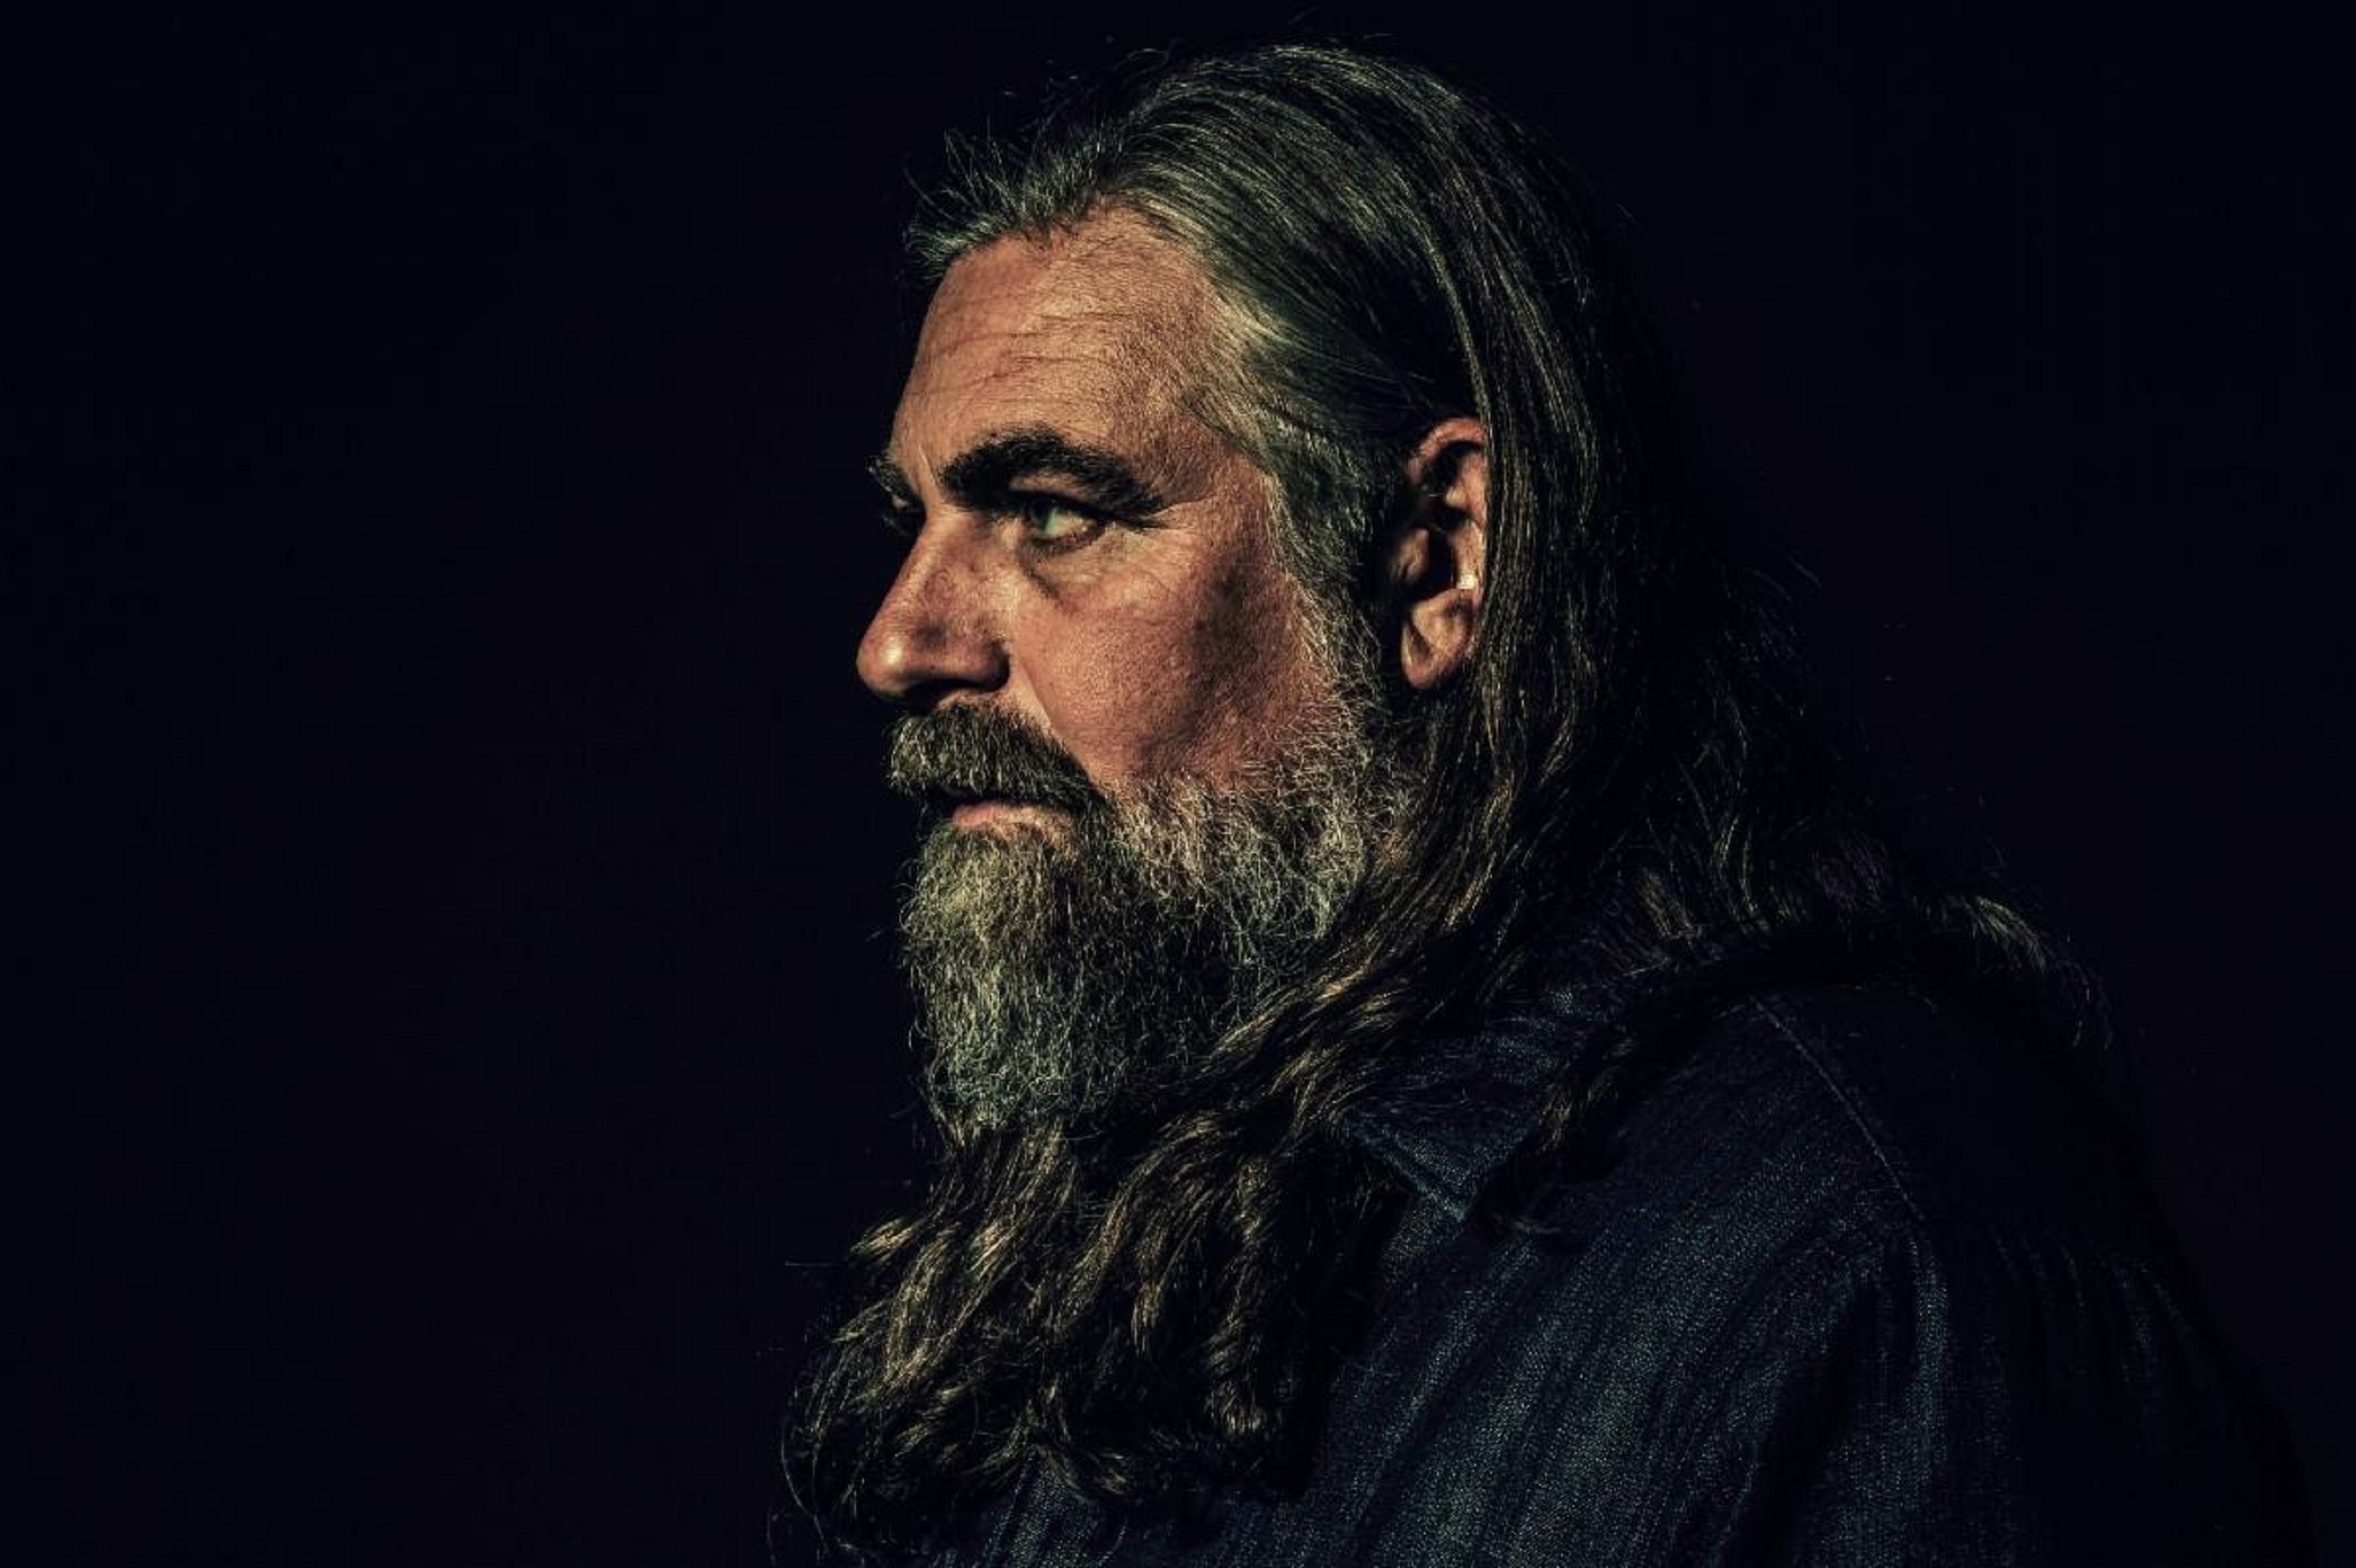 The White Buffalo: Releases Three New Videos From Acclaimed Album 'Year of the Dark Horse'